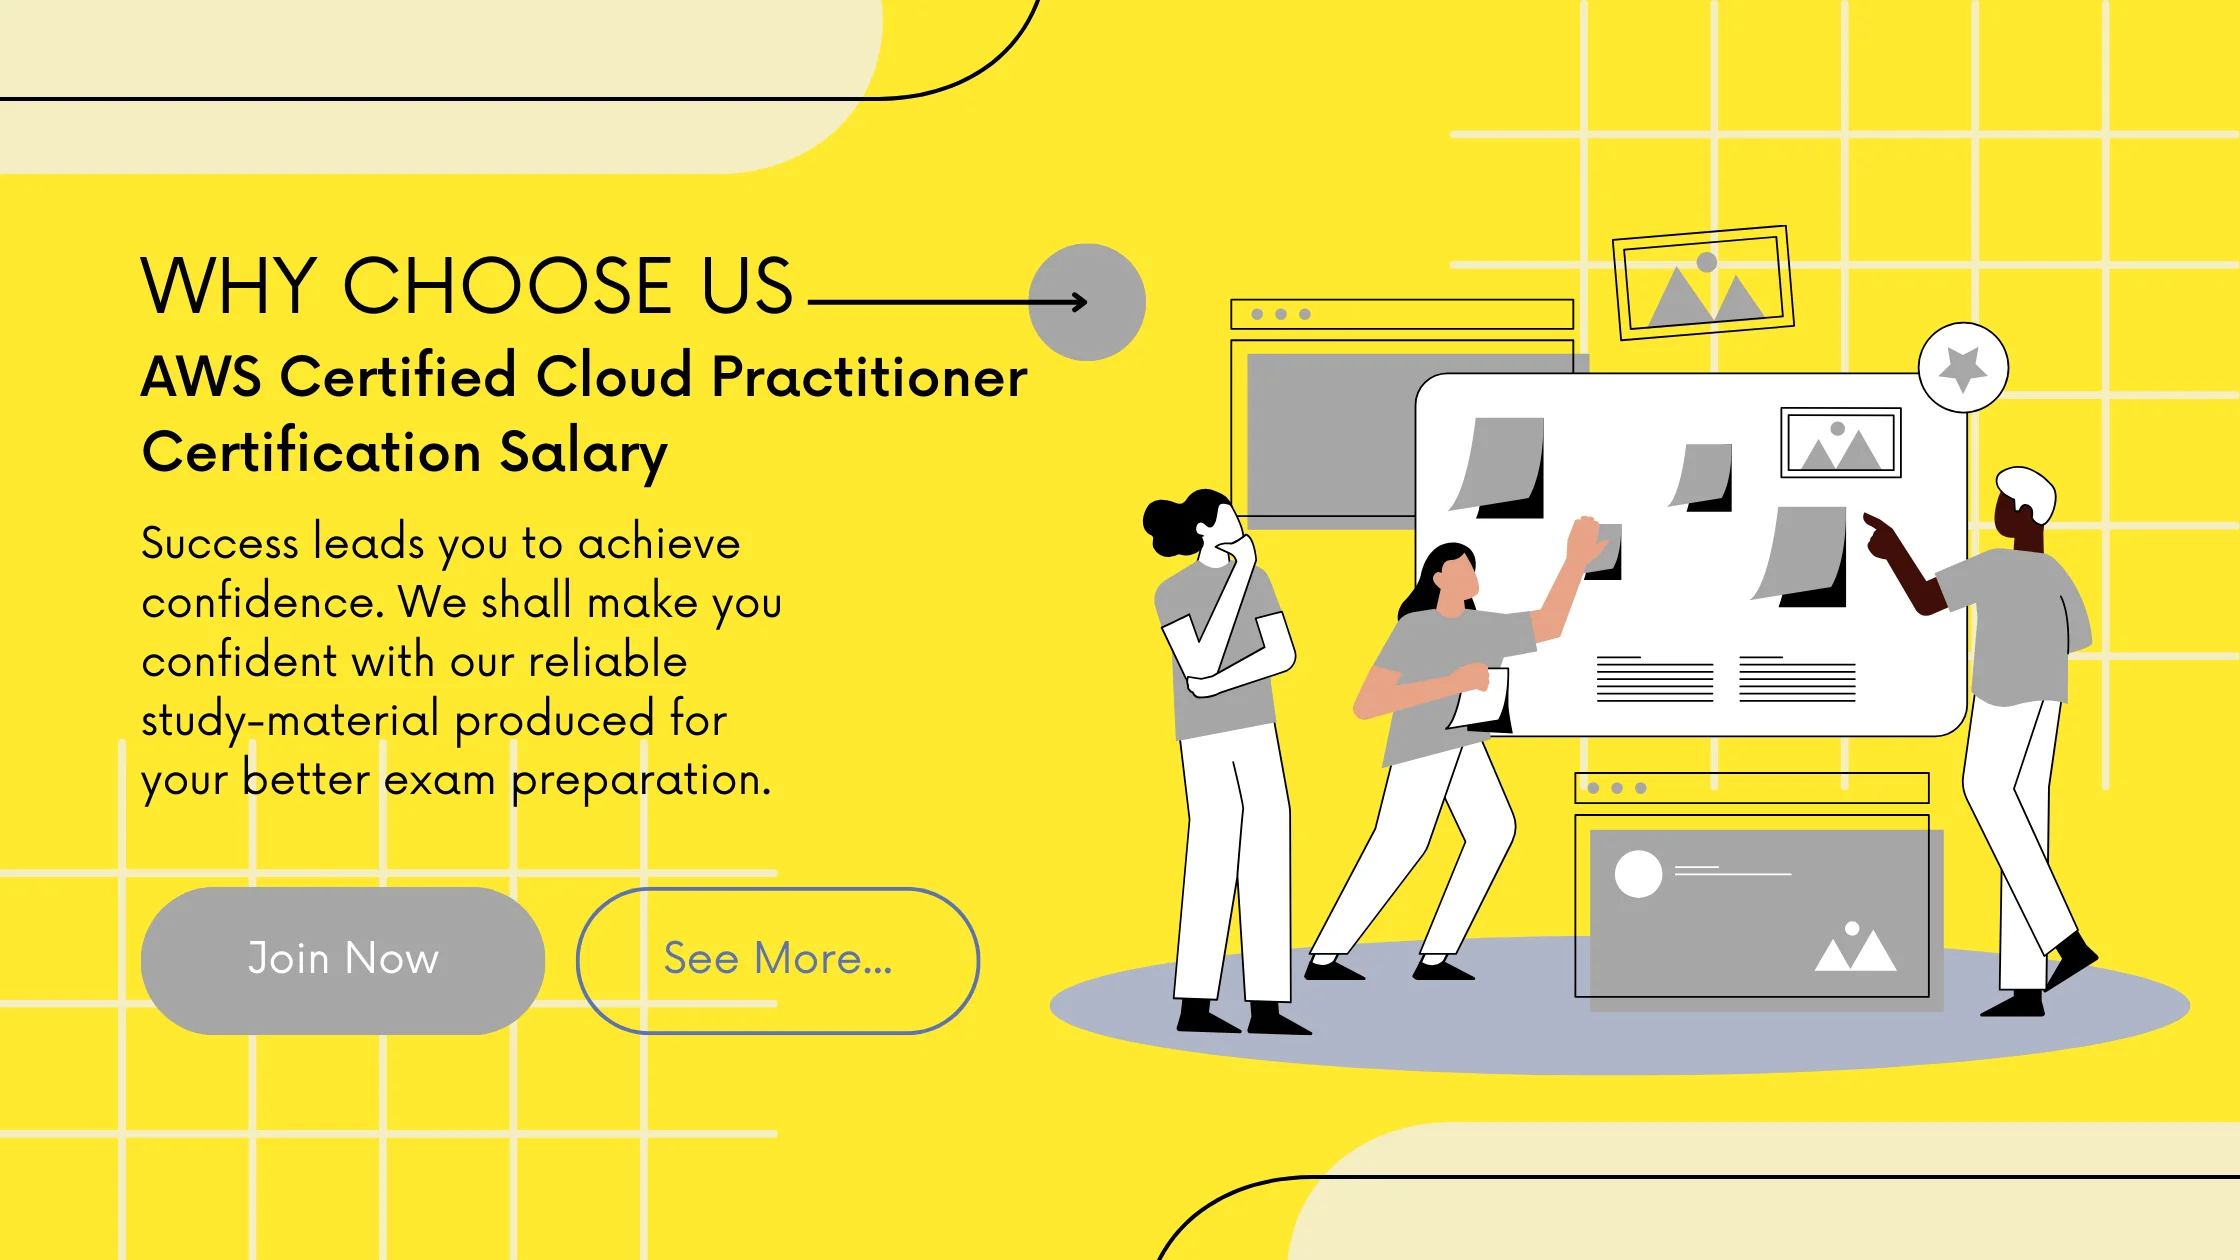 AWS Certified Cloud Practitioner Certification Salary promotion